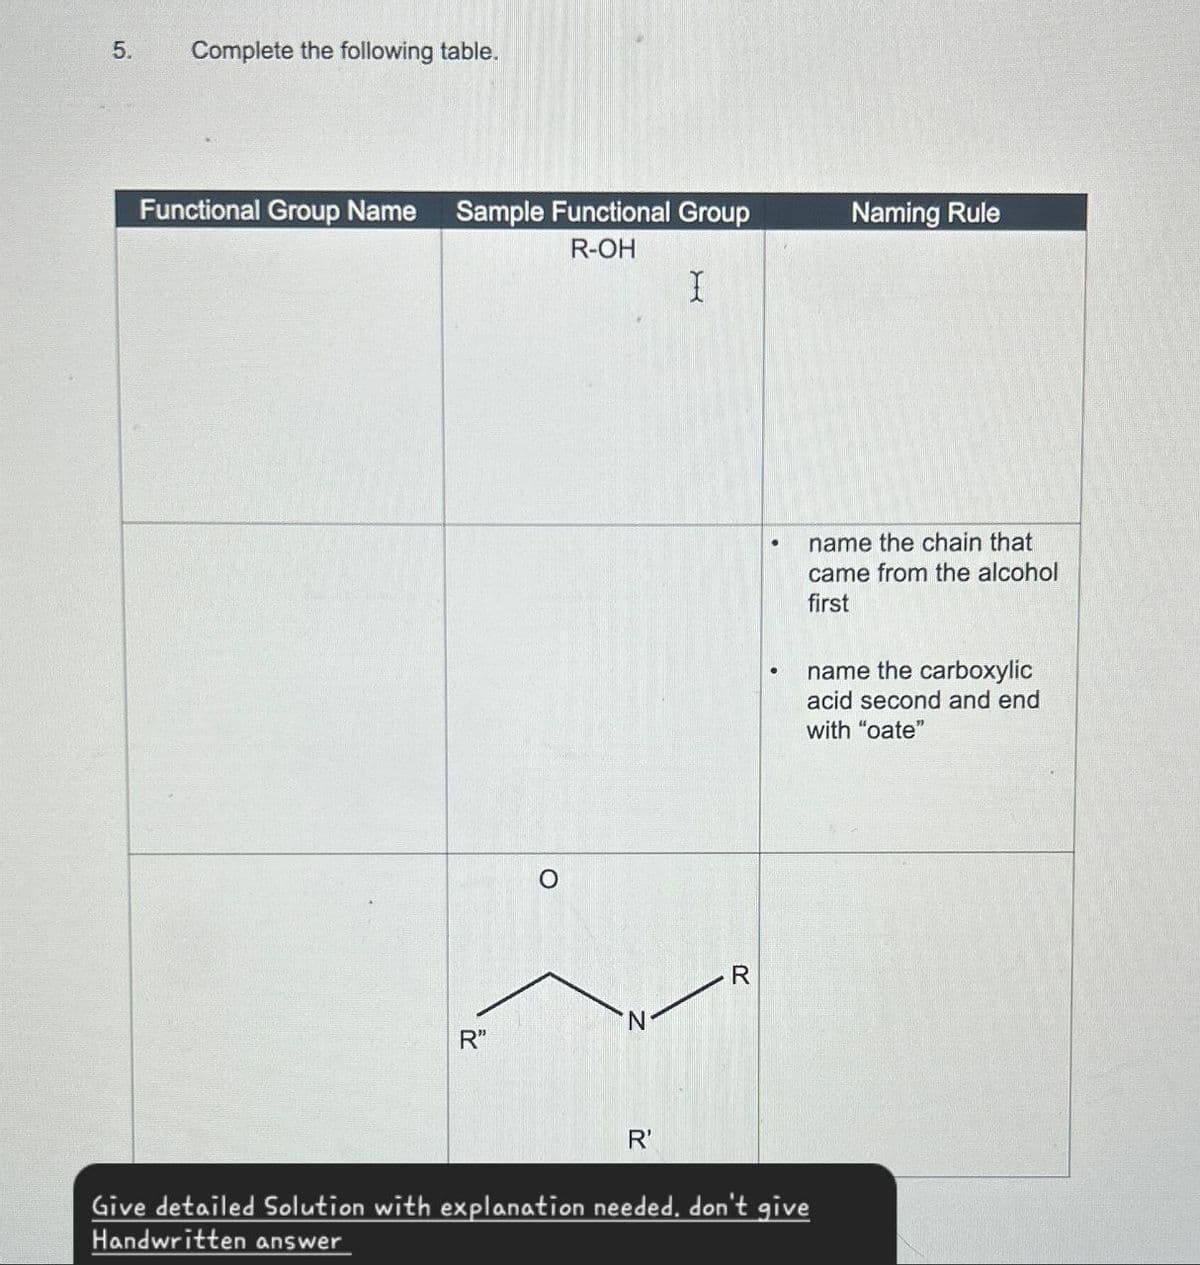 5.
Complete the following table.
Functional Group Name
Sample Functional Group
R-OH
Naming Rule
I
R❞
о
R'
R
name the chain that
came from the alcohol
first
name the carboxylic
acid second and end
with "oate"
Give detailed Solution with explanation needed, don't give
Handwritten answer